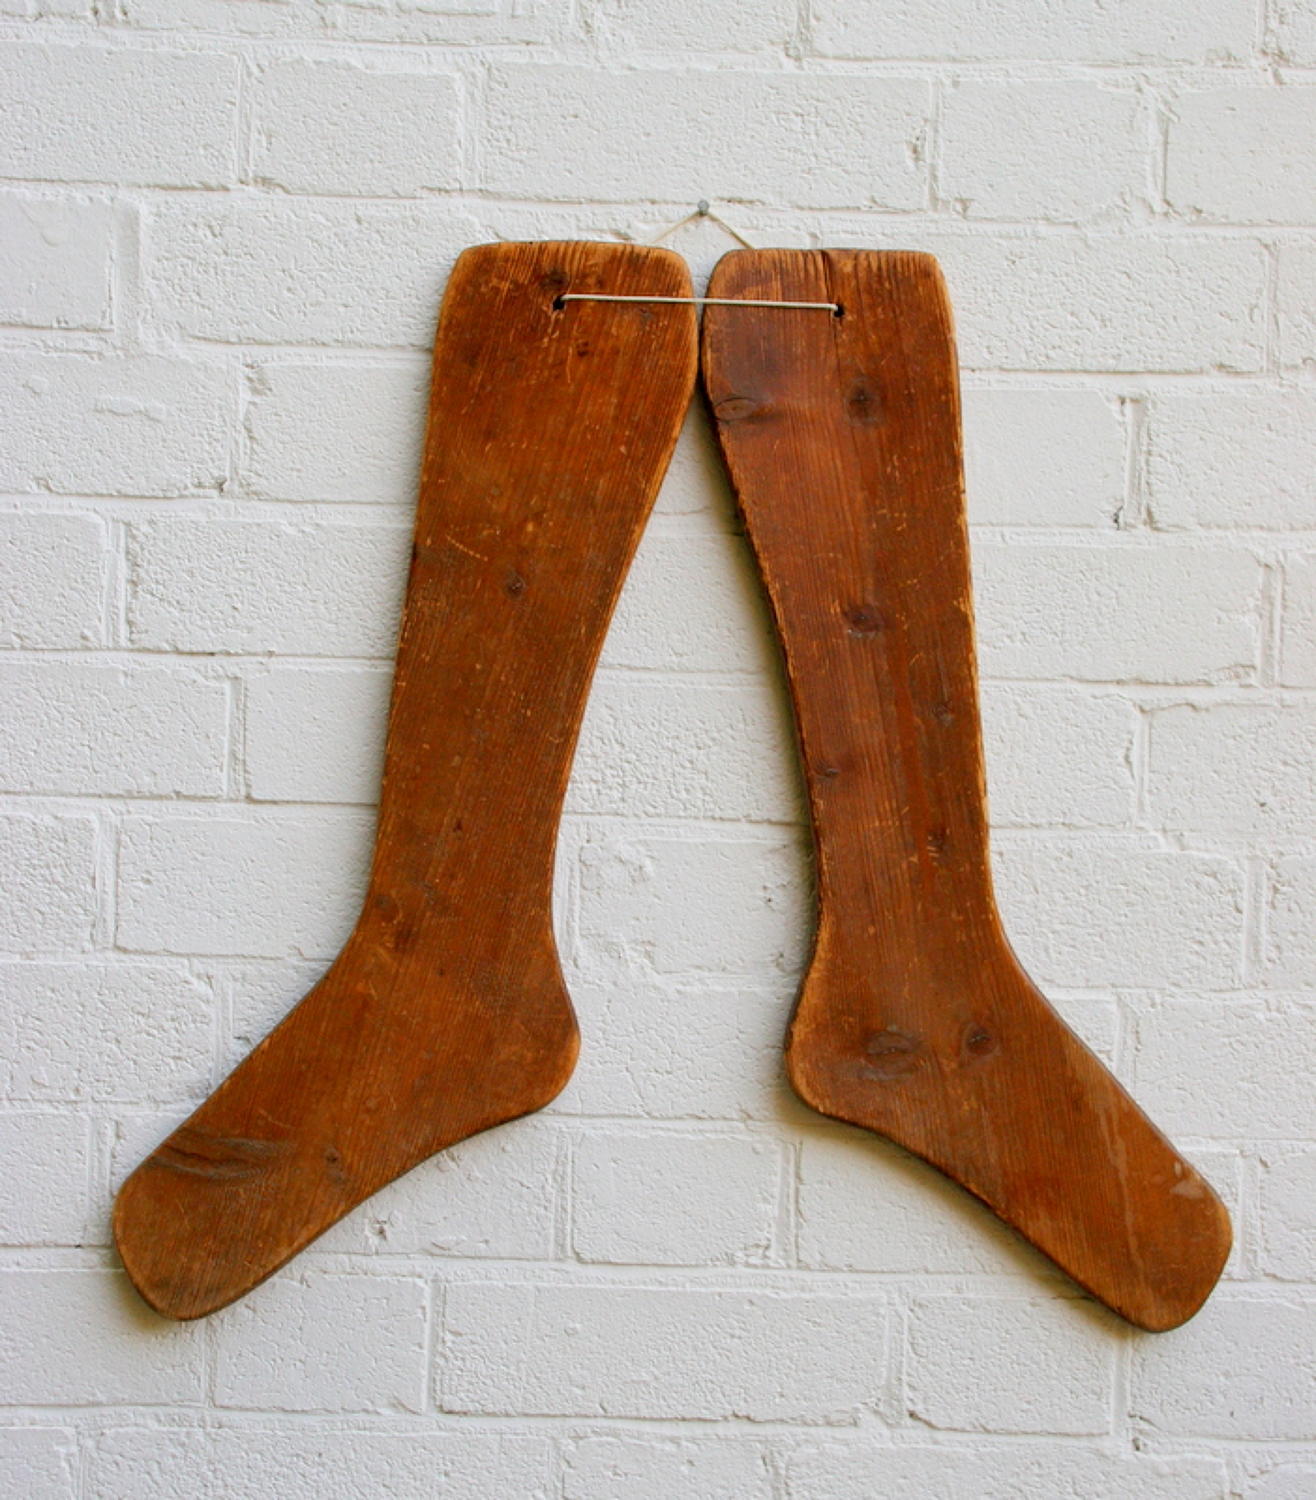 Pair of Wooden Sock Dryers early 20th century